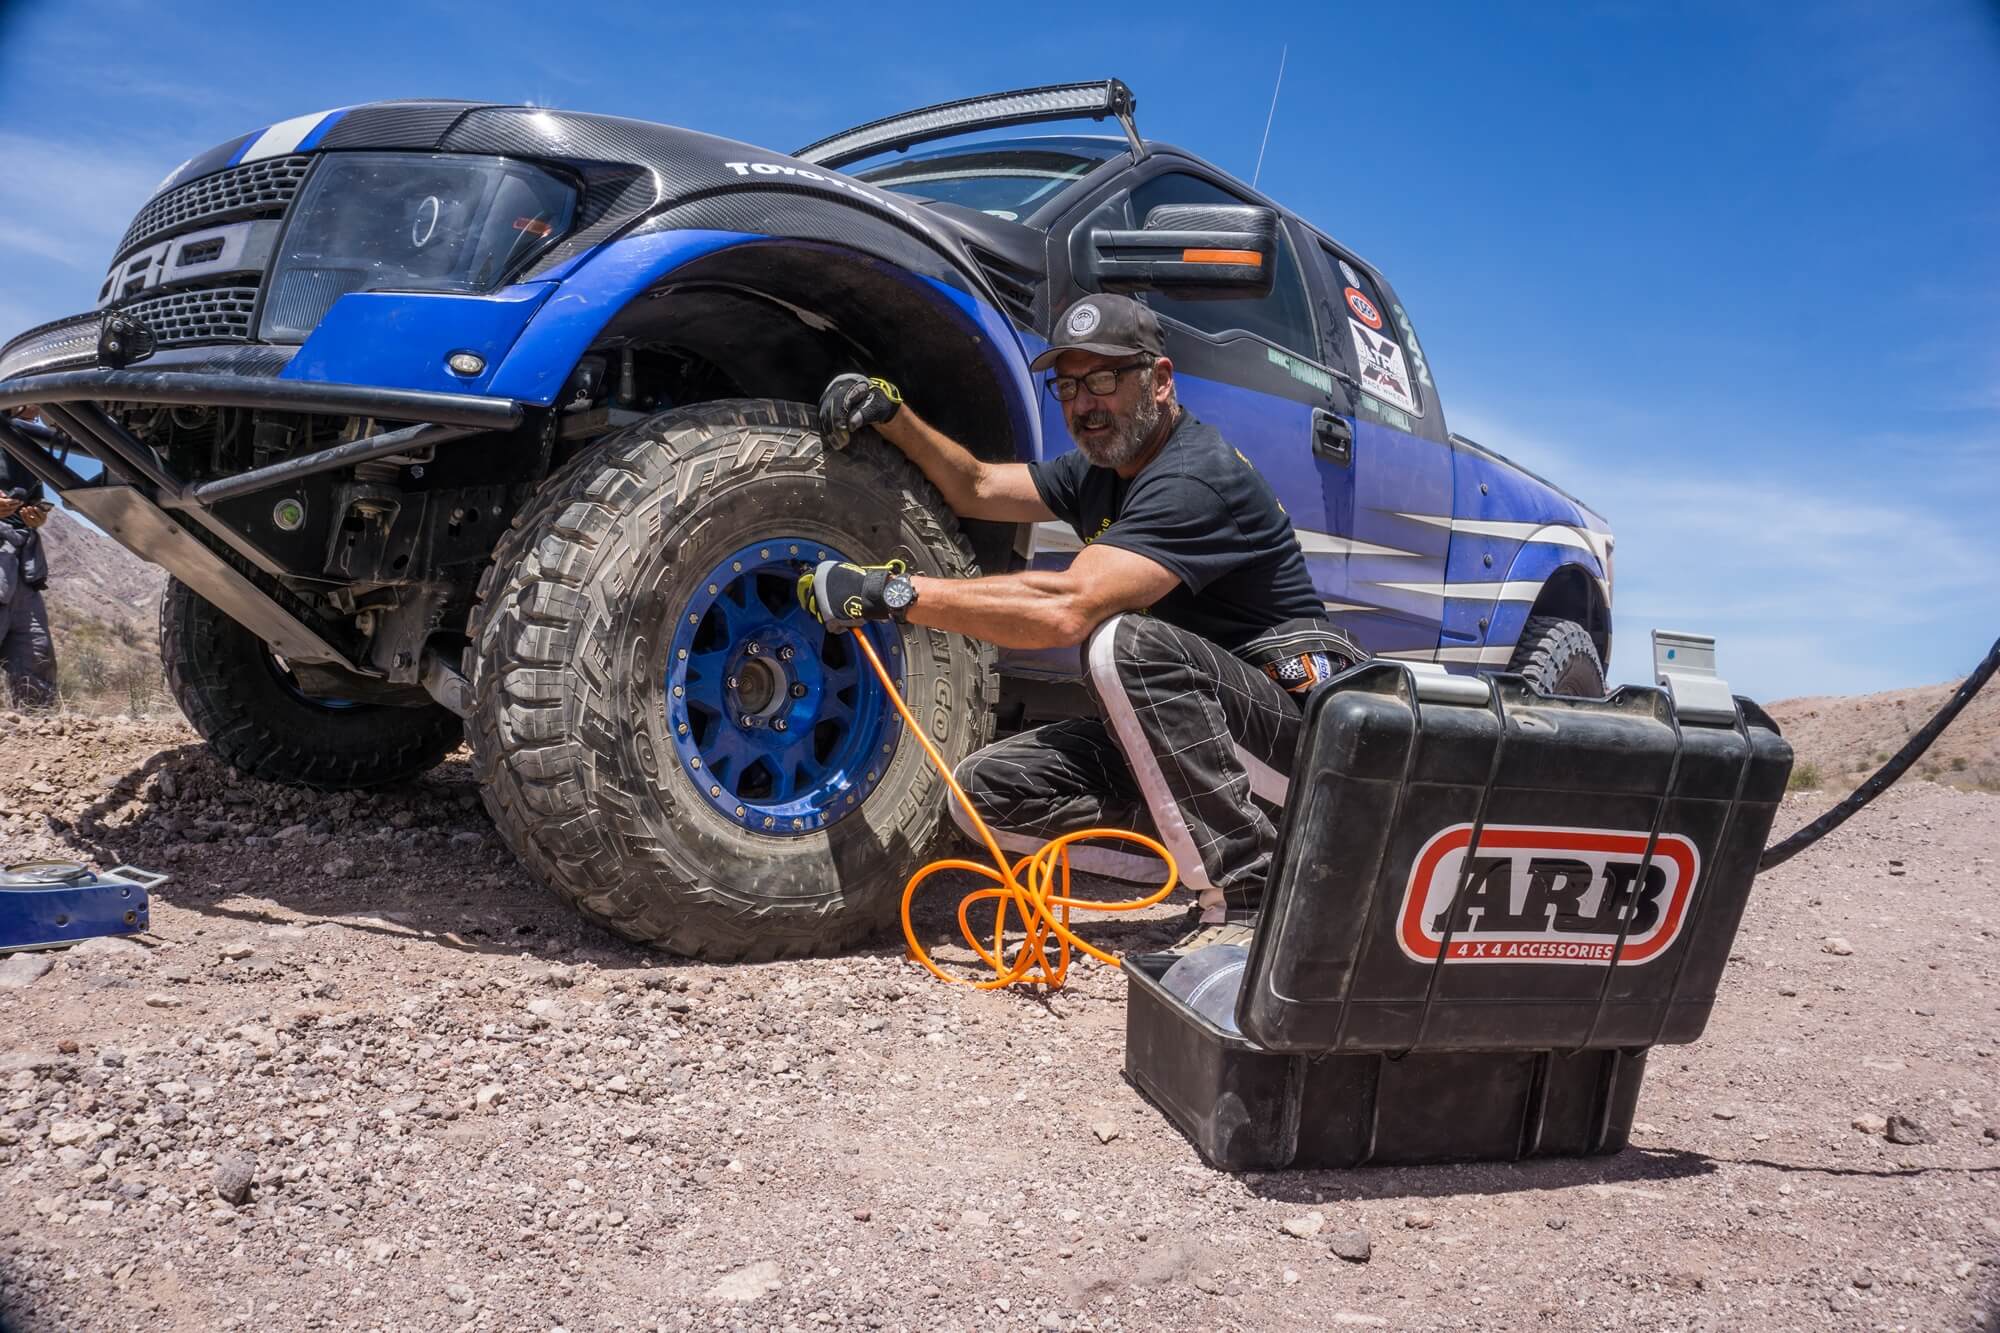 ARB’s portable air compressor mounts to your battery with alligator clips, allowing you to easily move it from vehicle to vehicle. The portable kit with a one-gallon air tank and inflation accessories in a durable and convenient carry case. ARB’s twin air compressors are constructed of lightweight, high-strength engineering grade materials and incorporate quality components for quiet operation and extended durability.